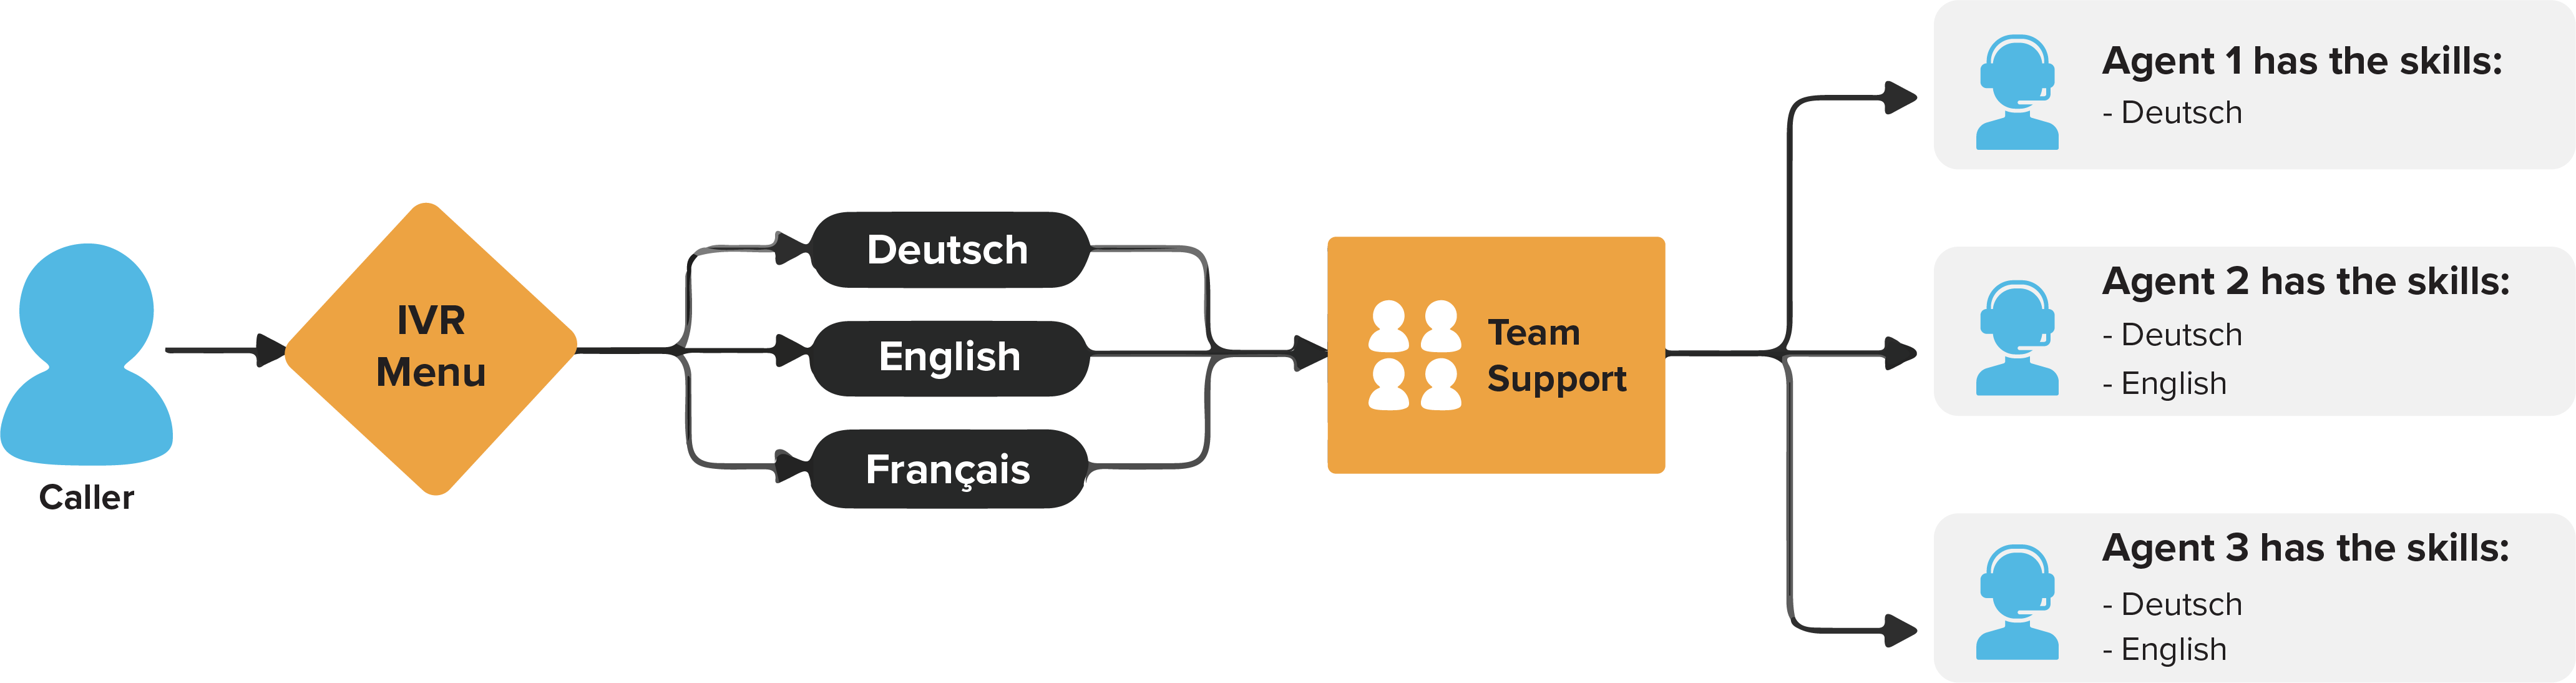 Skill-based routing during a support call based on language.